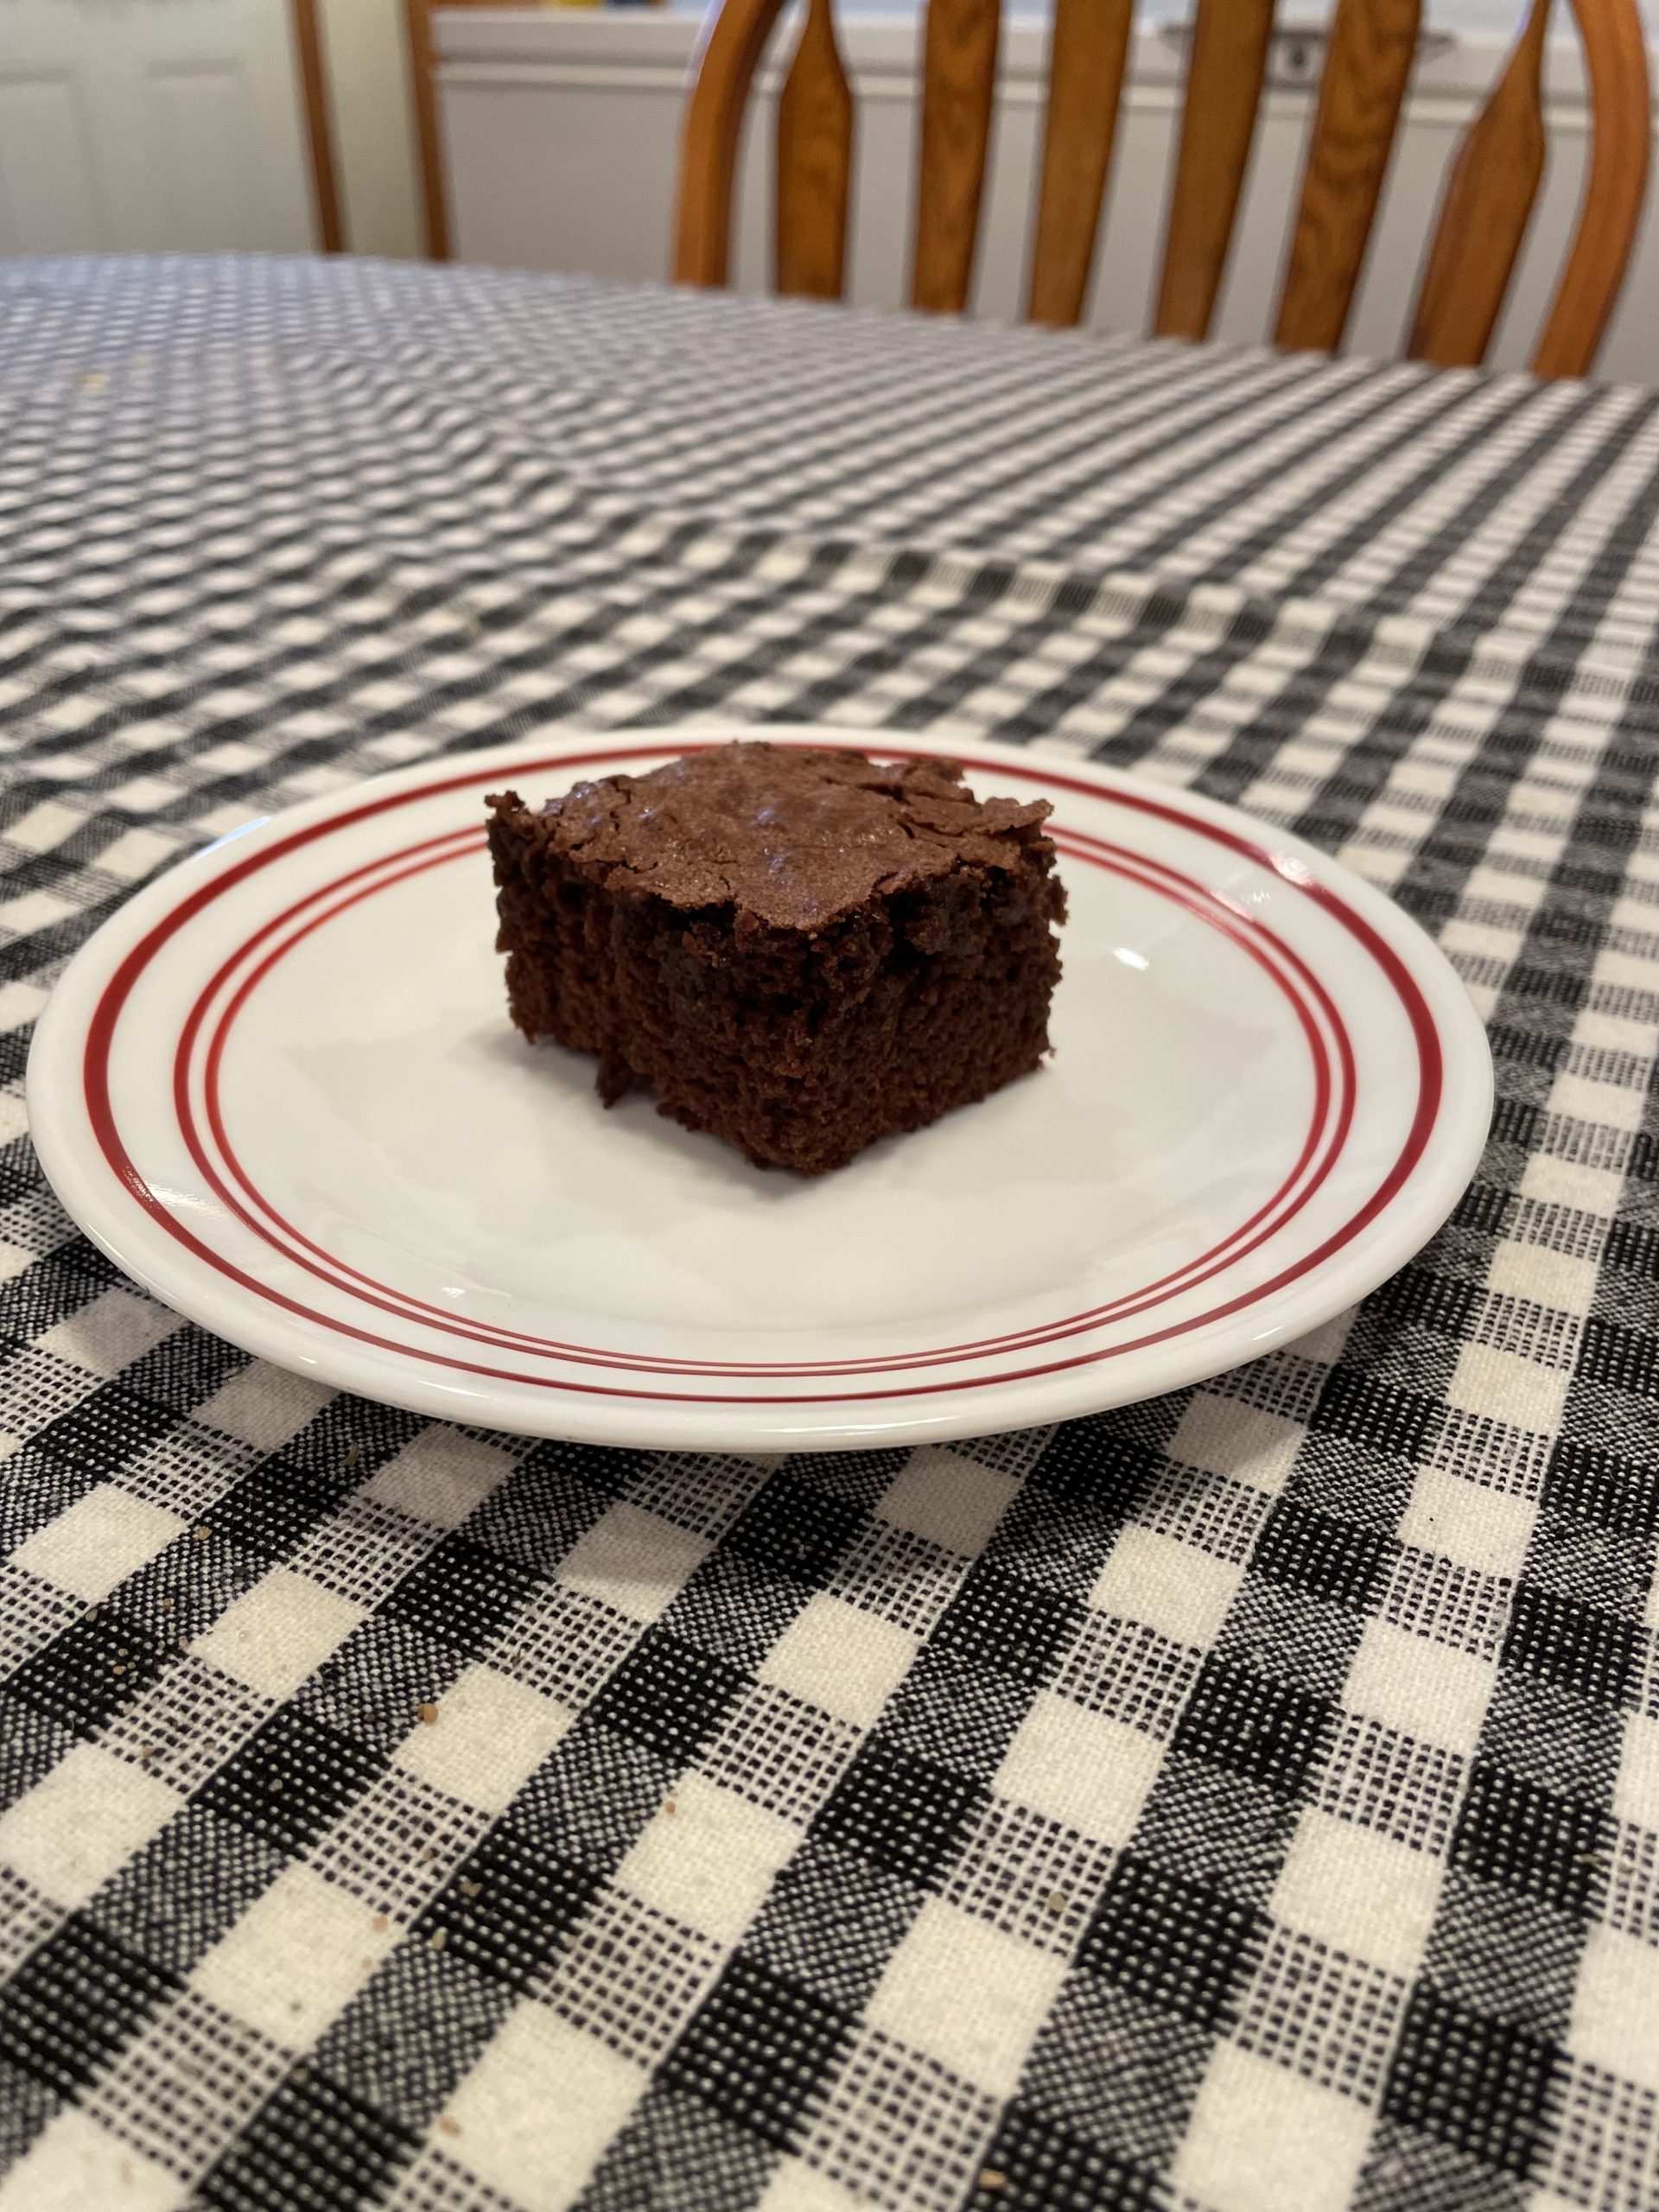 Everybody's Favorite Brownies is the featured recipe in this week's High Plains Journal.